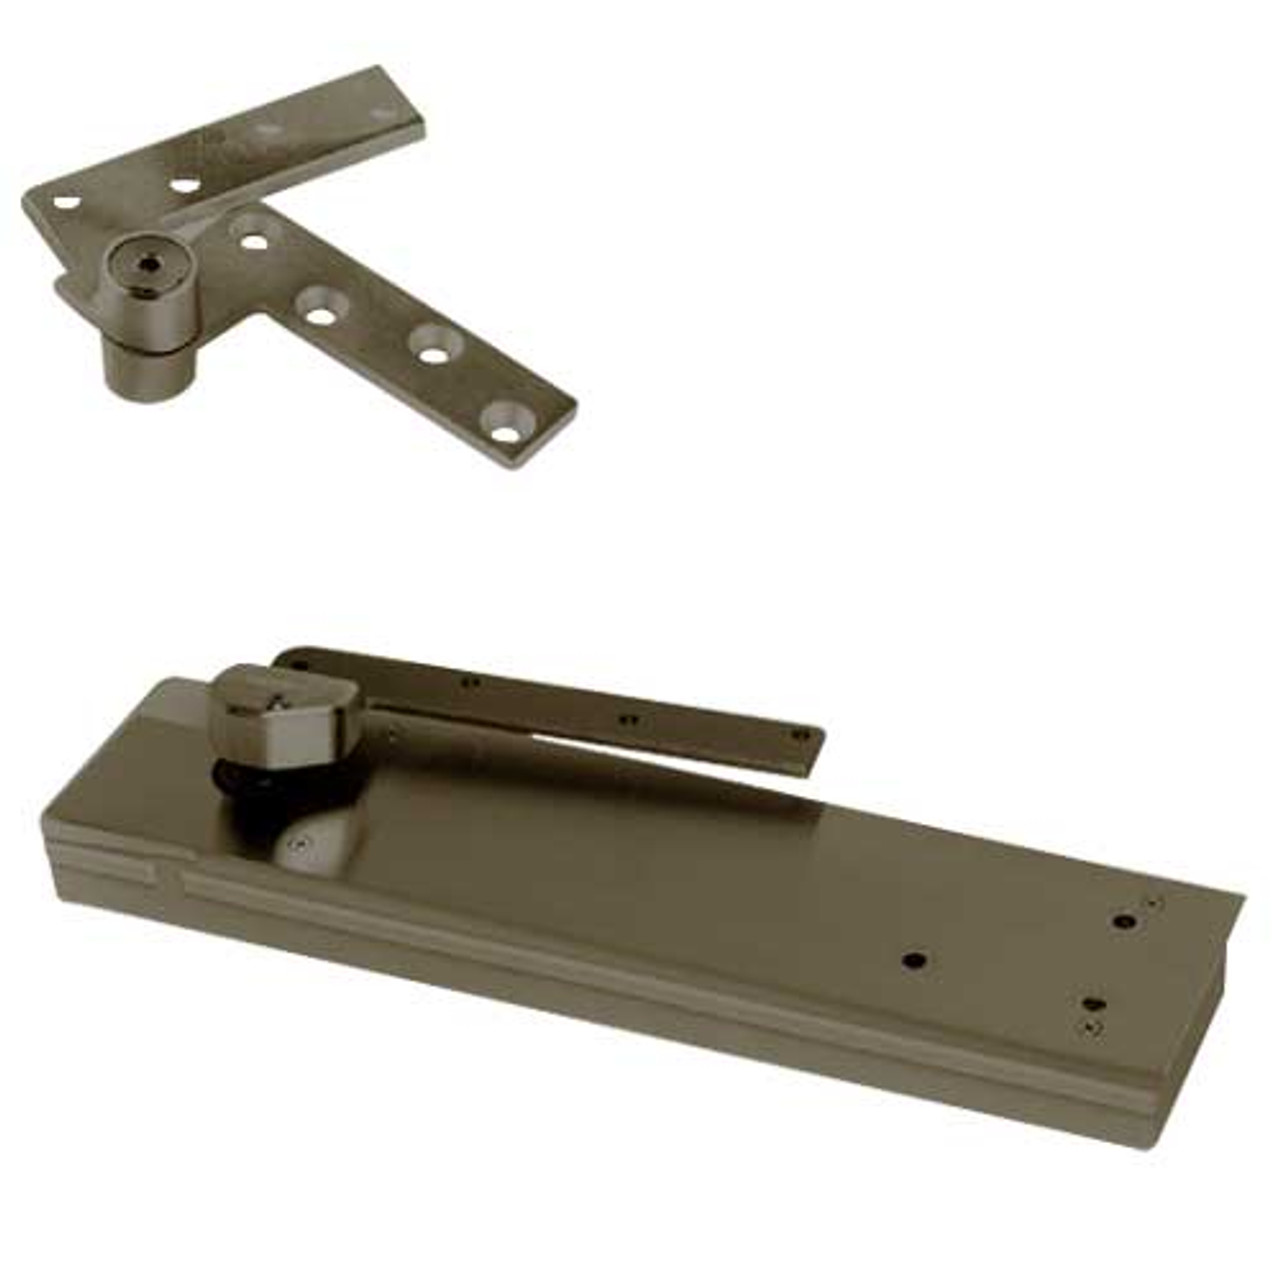 5103ABC180-1-1/2OS-LCC-LH-613 Rixson 51 Series 1-1/2" Offset Hung Shallow Depth Floor Closers in Dark Bronze Finish